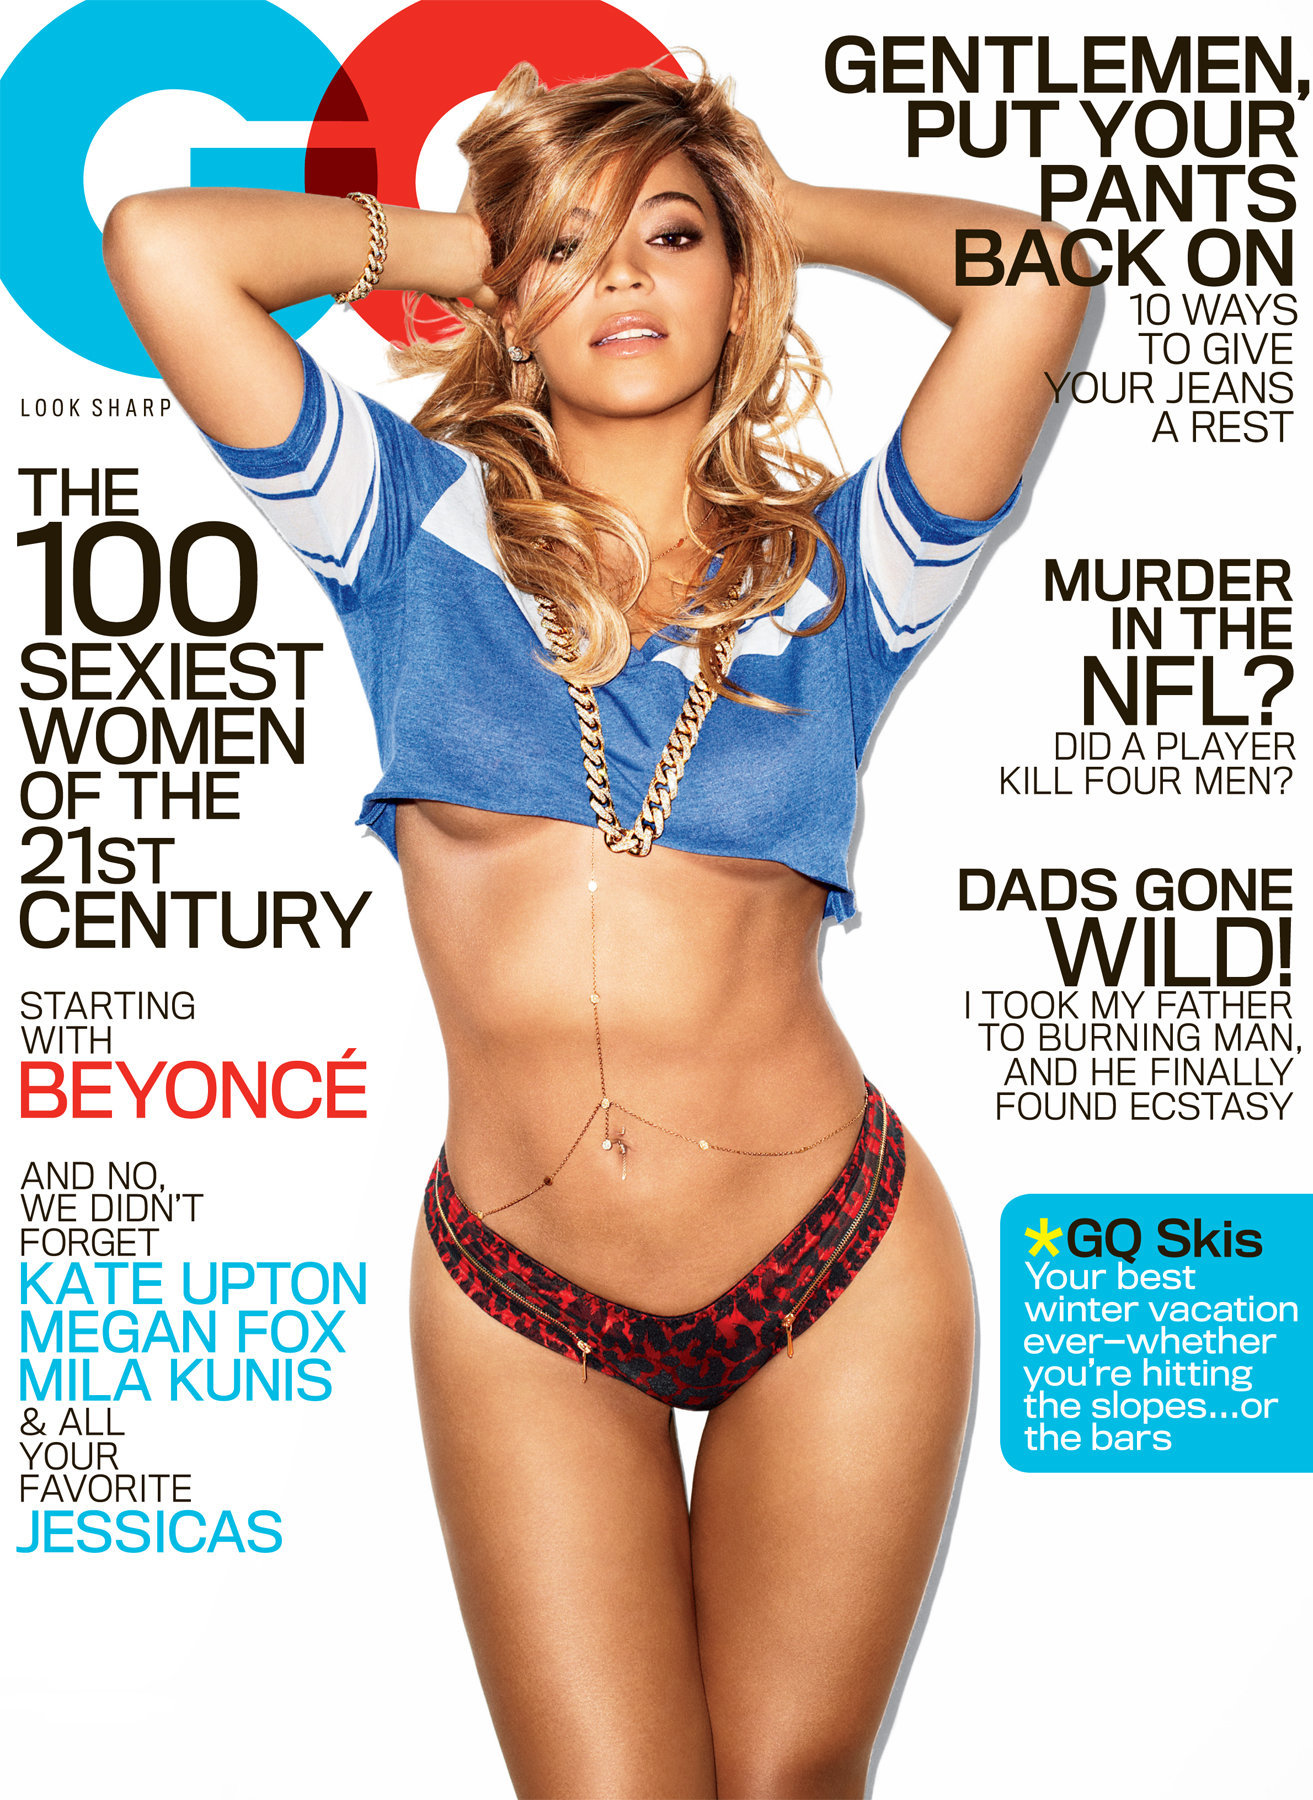 Beyonce Hot Singer Strikes The Same Pose On 13 Magazine Covers HuffPost Entertainment